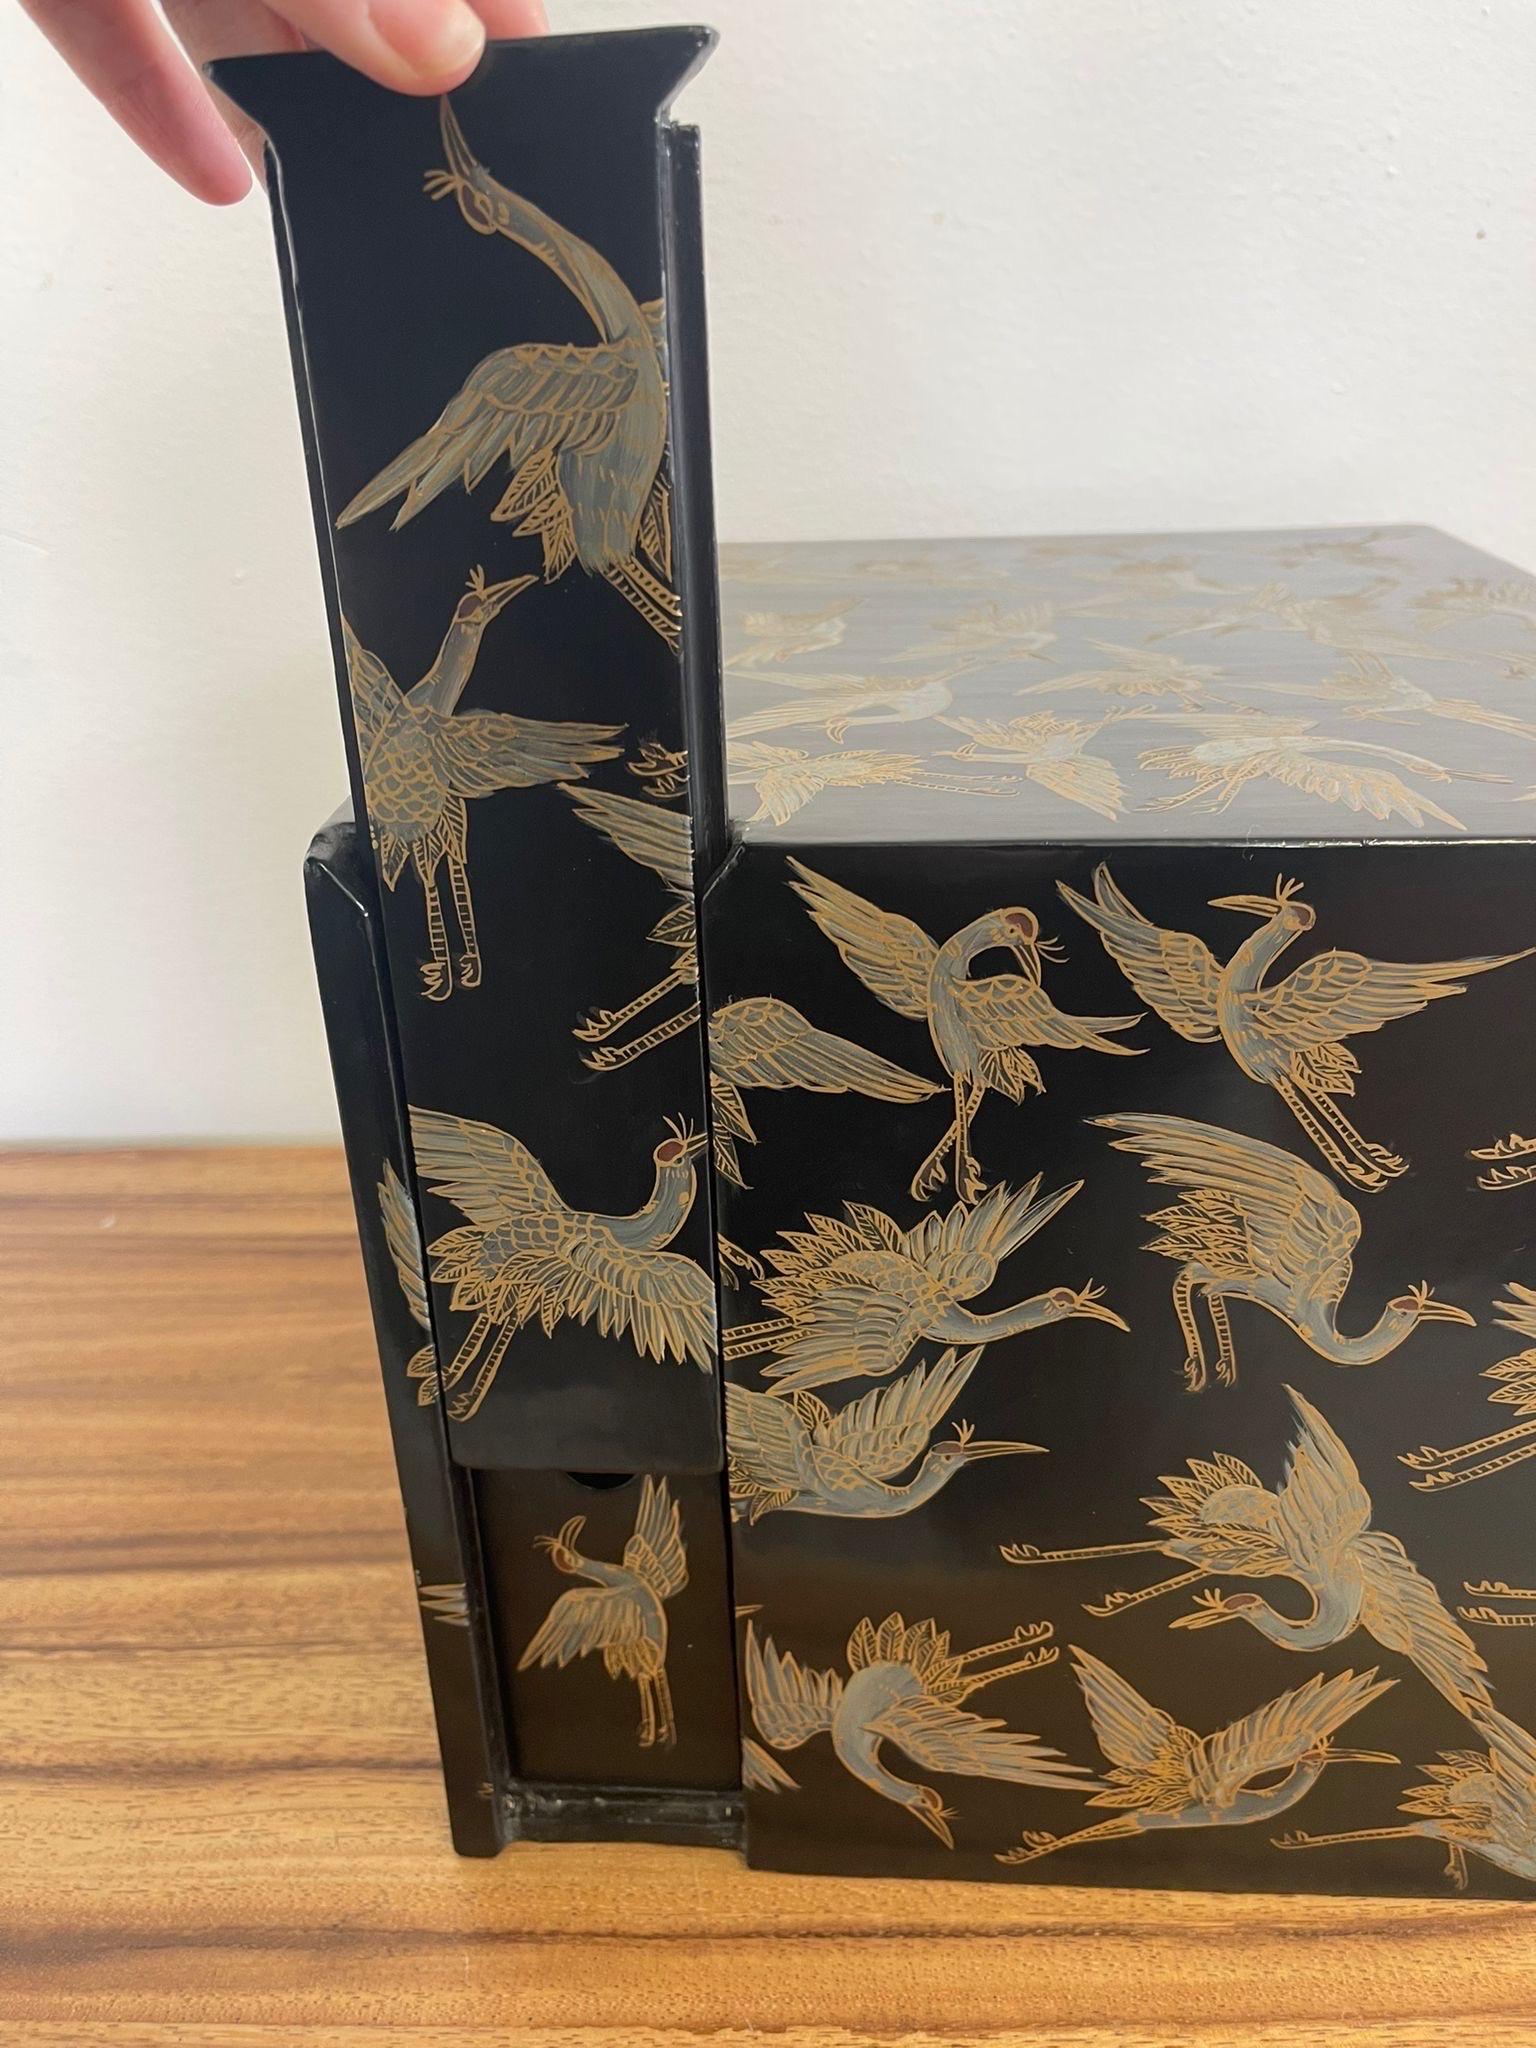 Late 20th Century Japanese Storage Box With Hidden Compartments and Crane Motif.